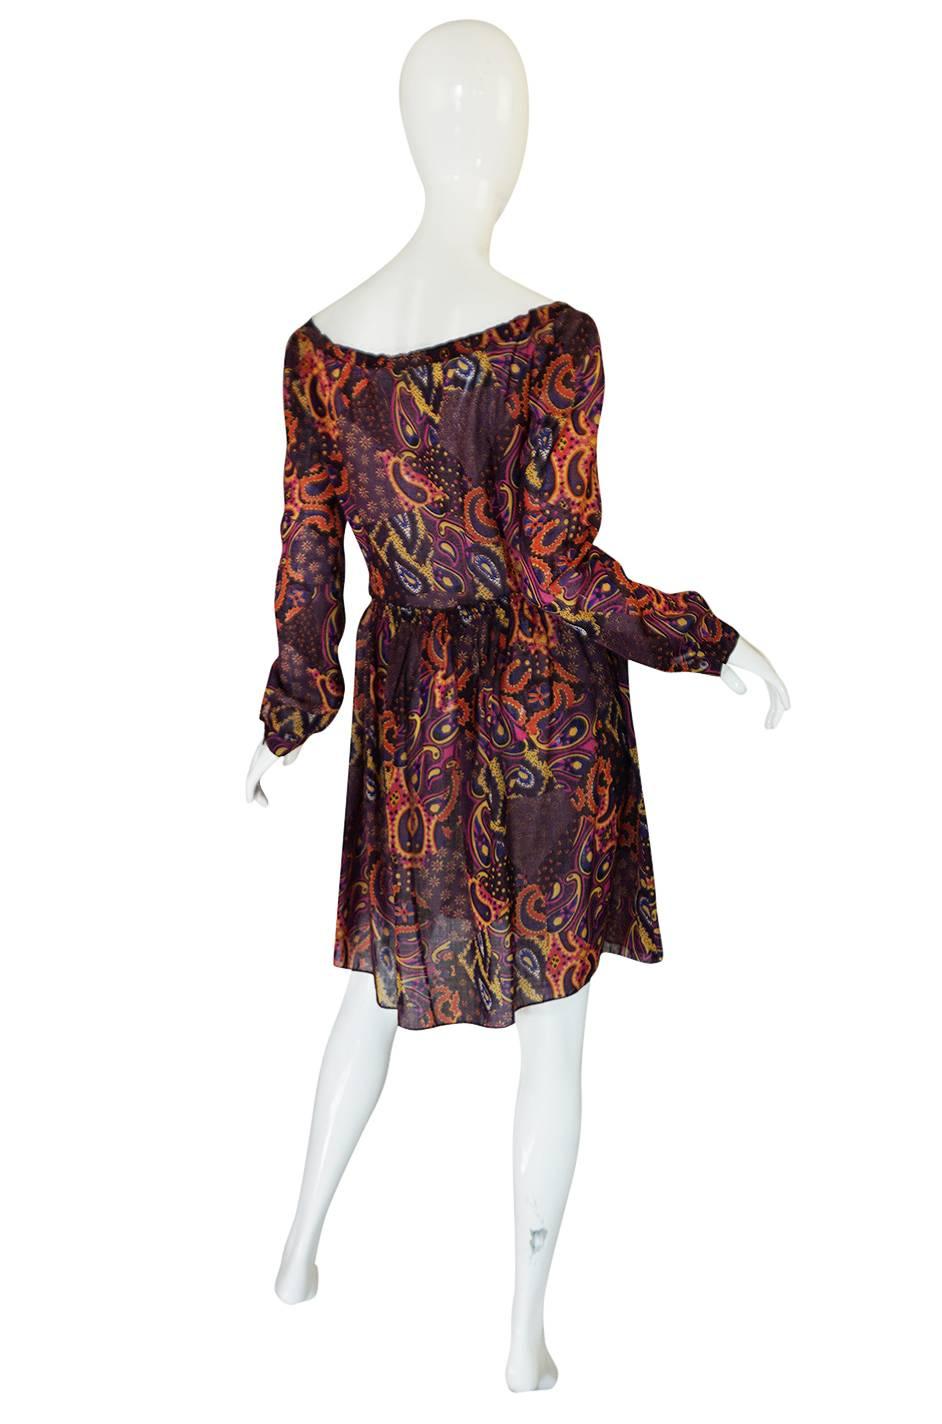 This dress is so pretty and easy to wear. The print is an elaborate and intricate paisley in swirls of color with the base color being purple. The fabric is a semi-sheer cotton voile with makes it so light and easy to wear. The cut is also easy with